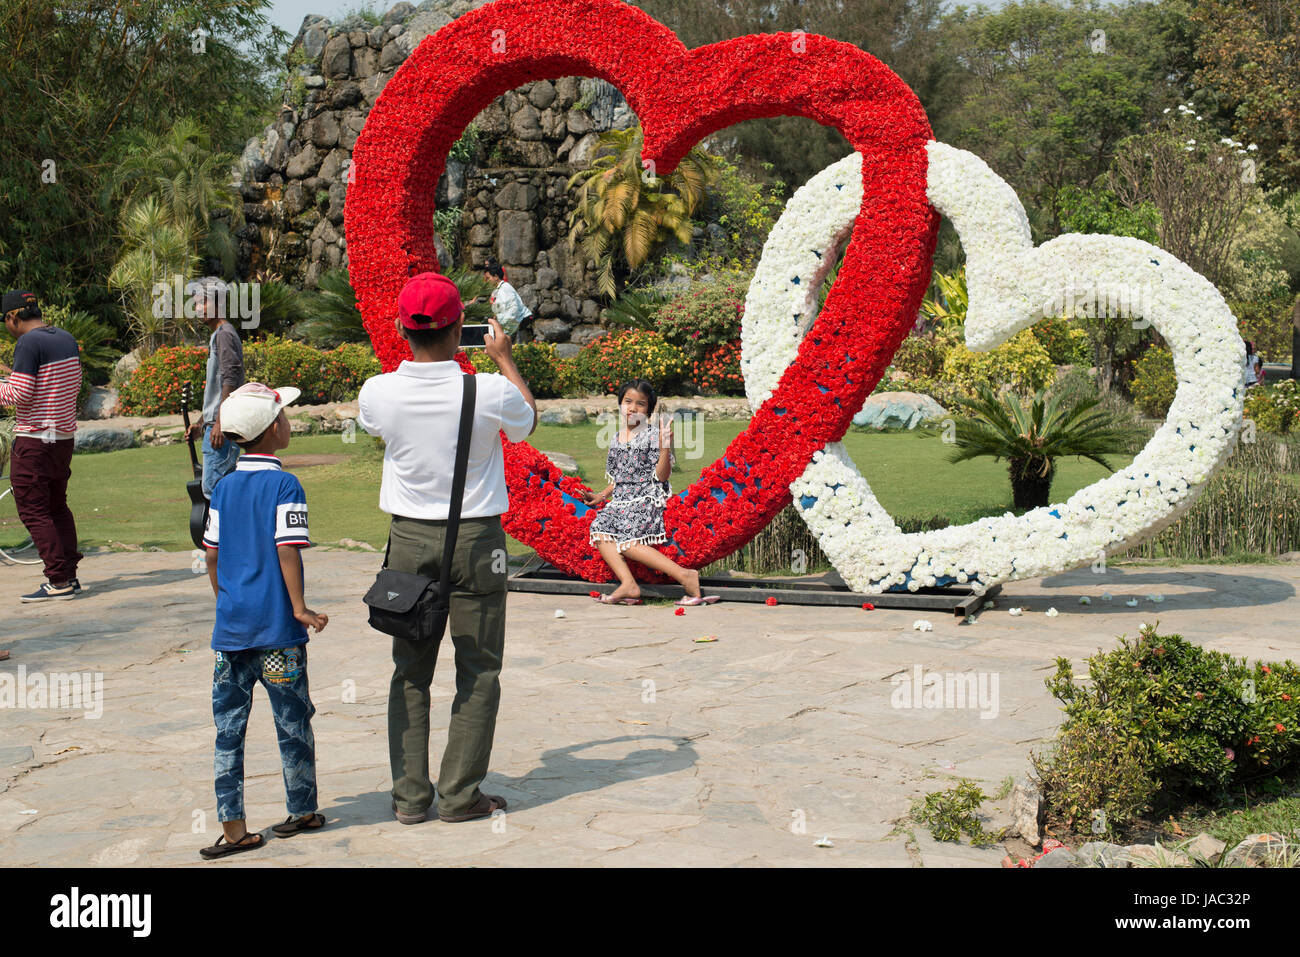 A father takes a photo of his daughter at a park in Mandalay, Myanmar (Burma) Stock Photo